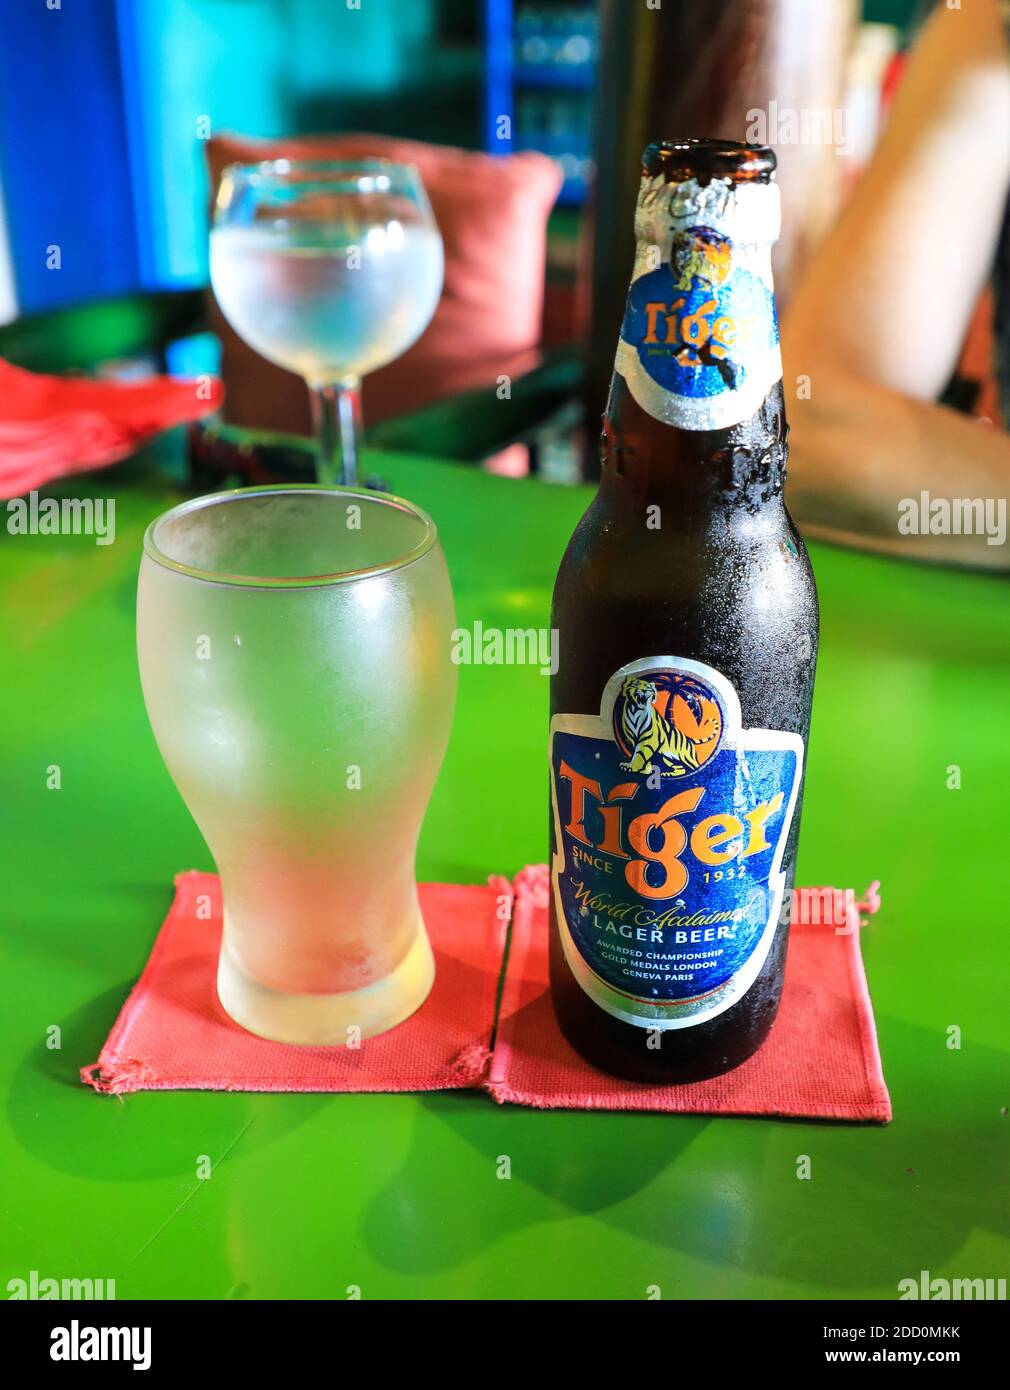 An ice cold glass and a bottle of Tiger Beer, a brand of beer from Singapore produced by Heineken Asia Pacific Stock Photo